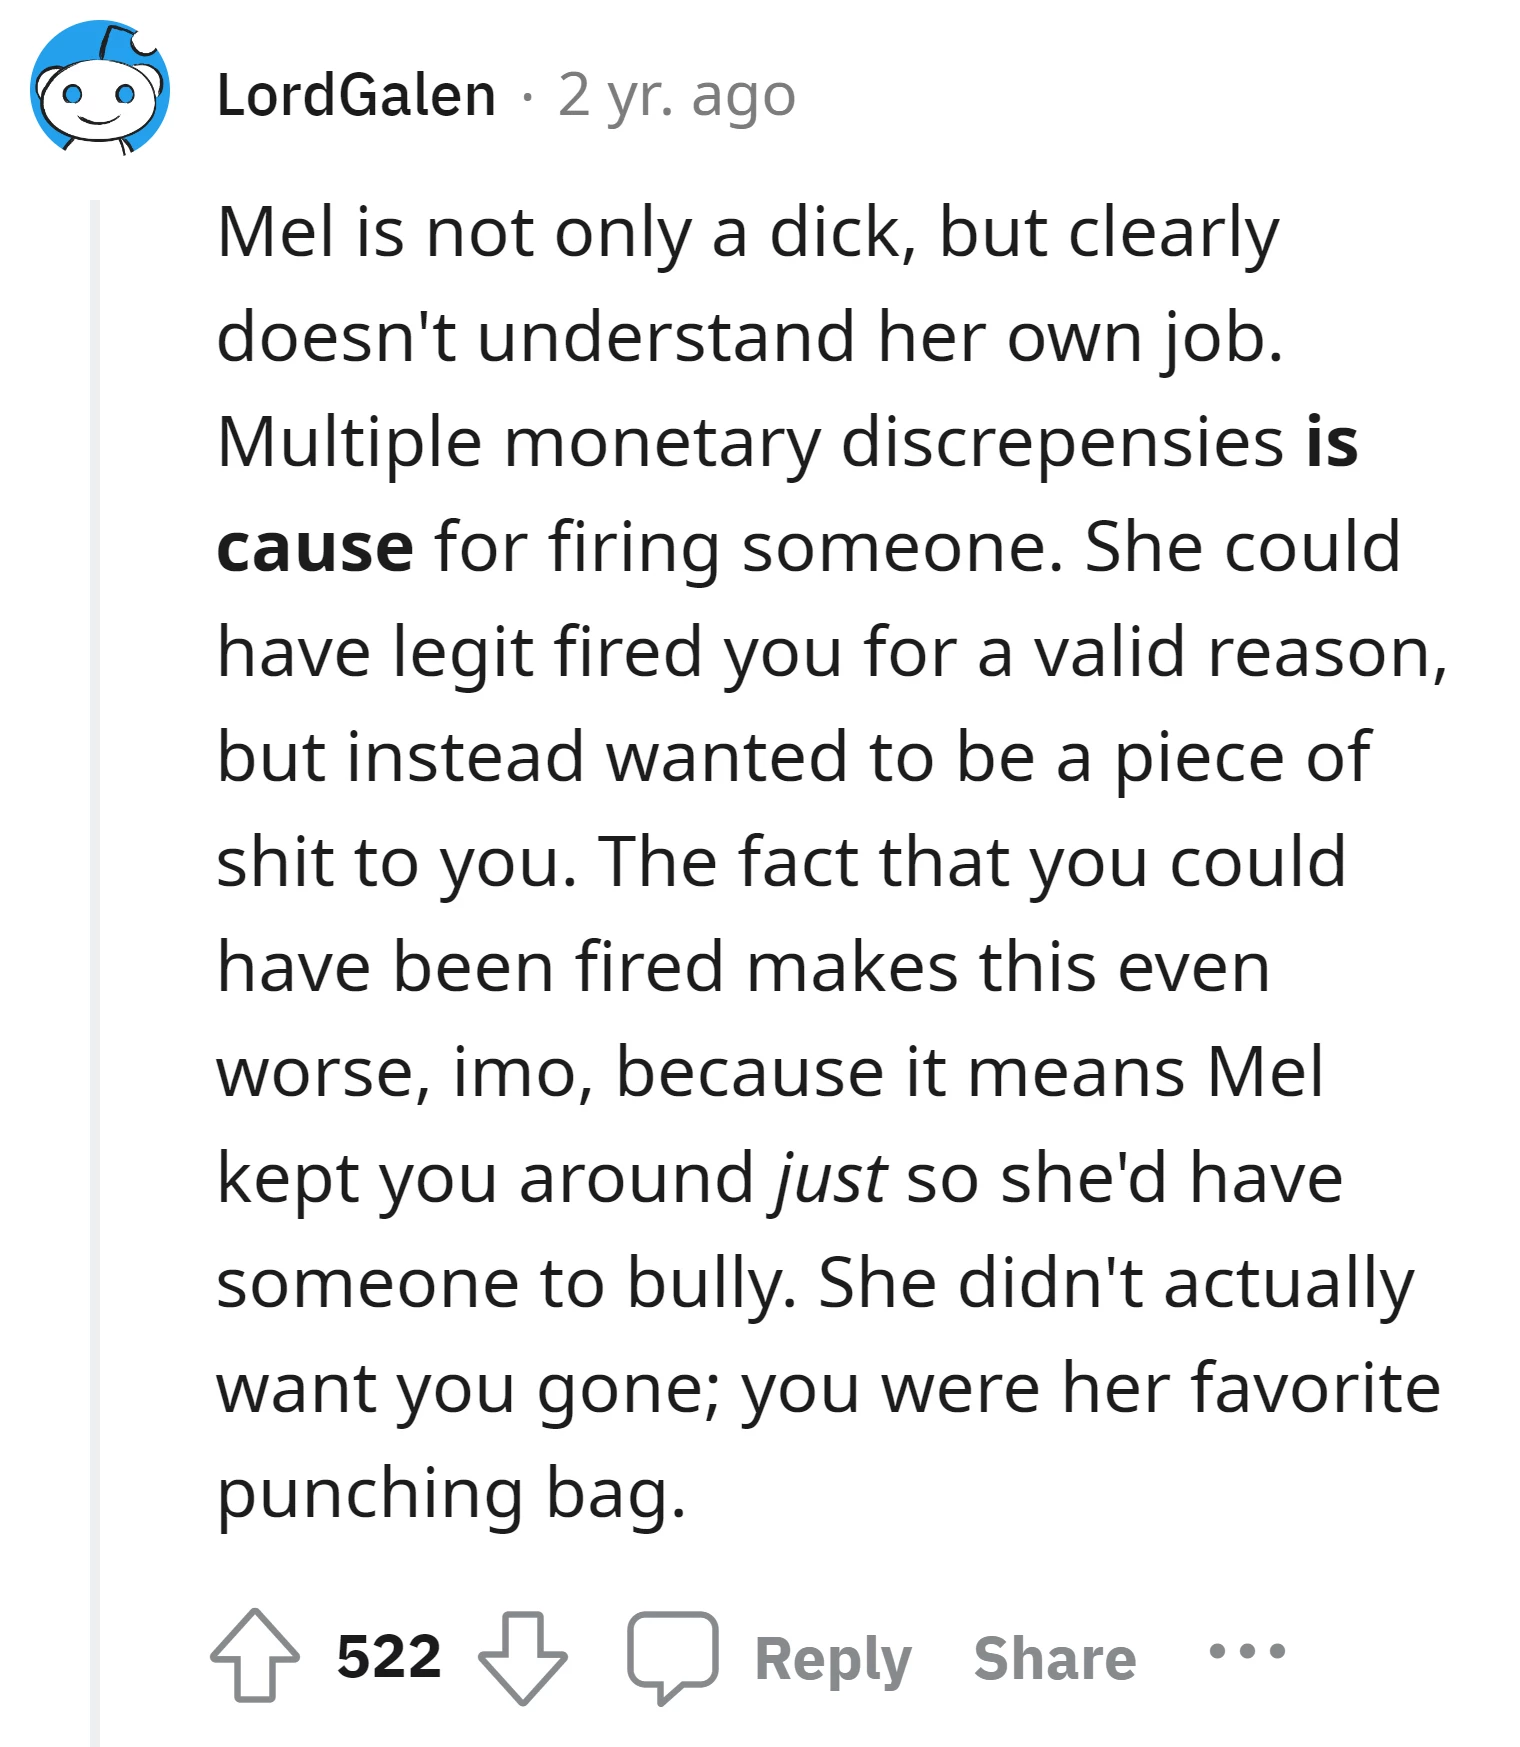 Mel chose to keep the OP around as a favorite target for bullying